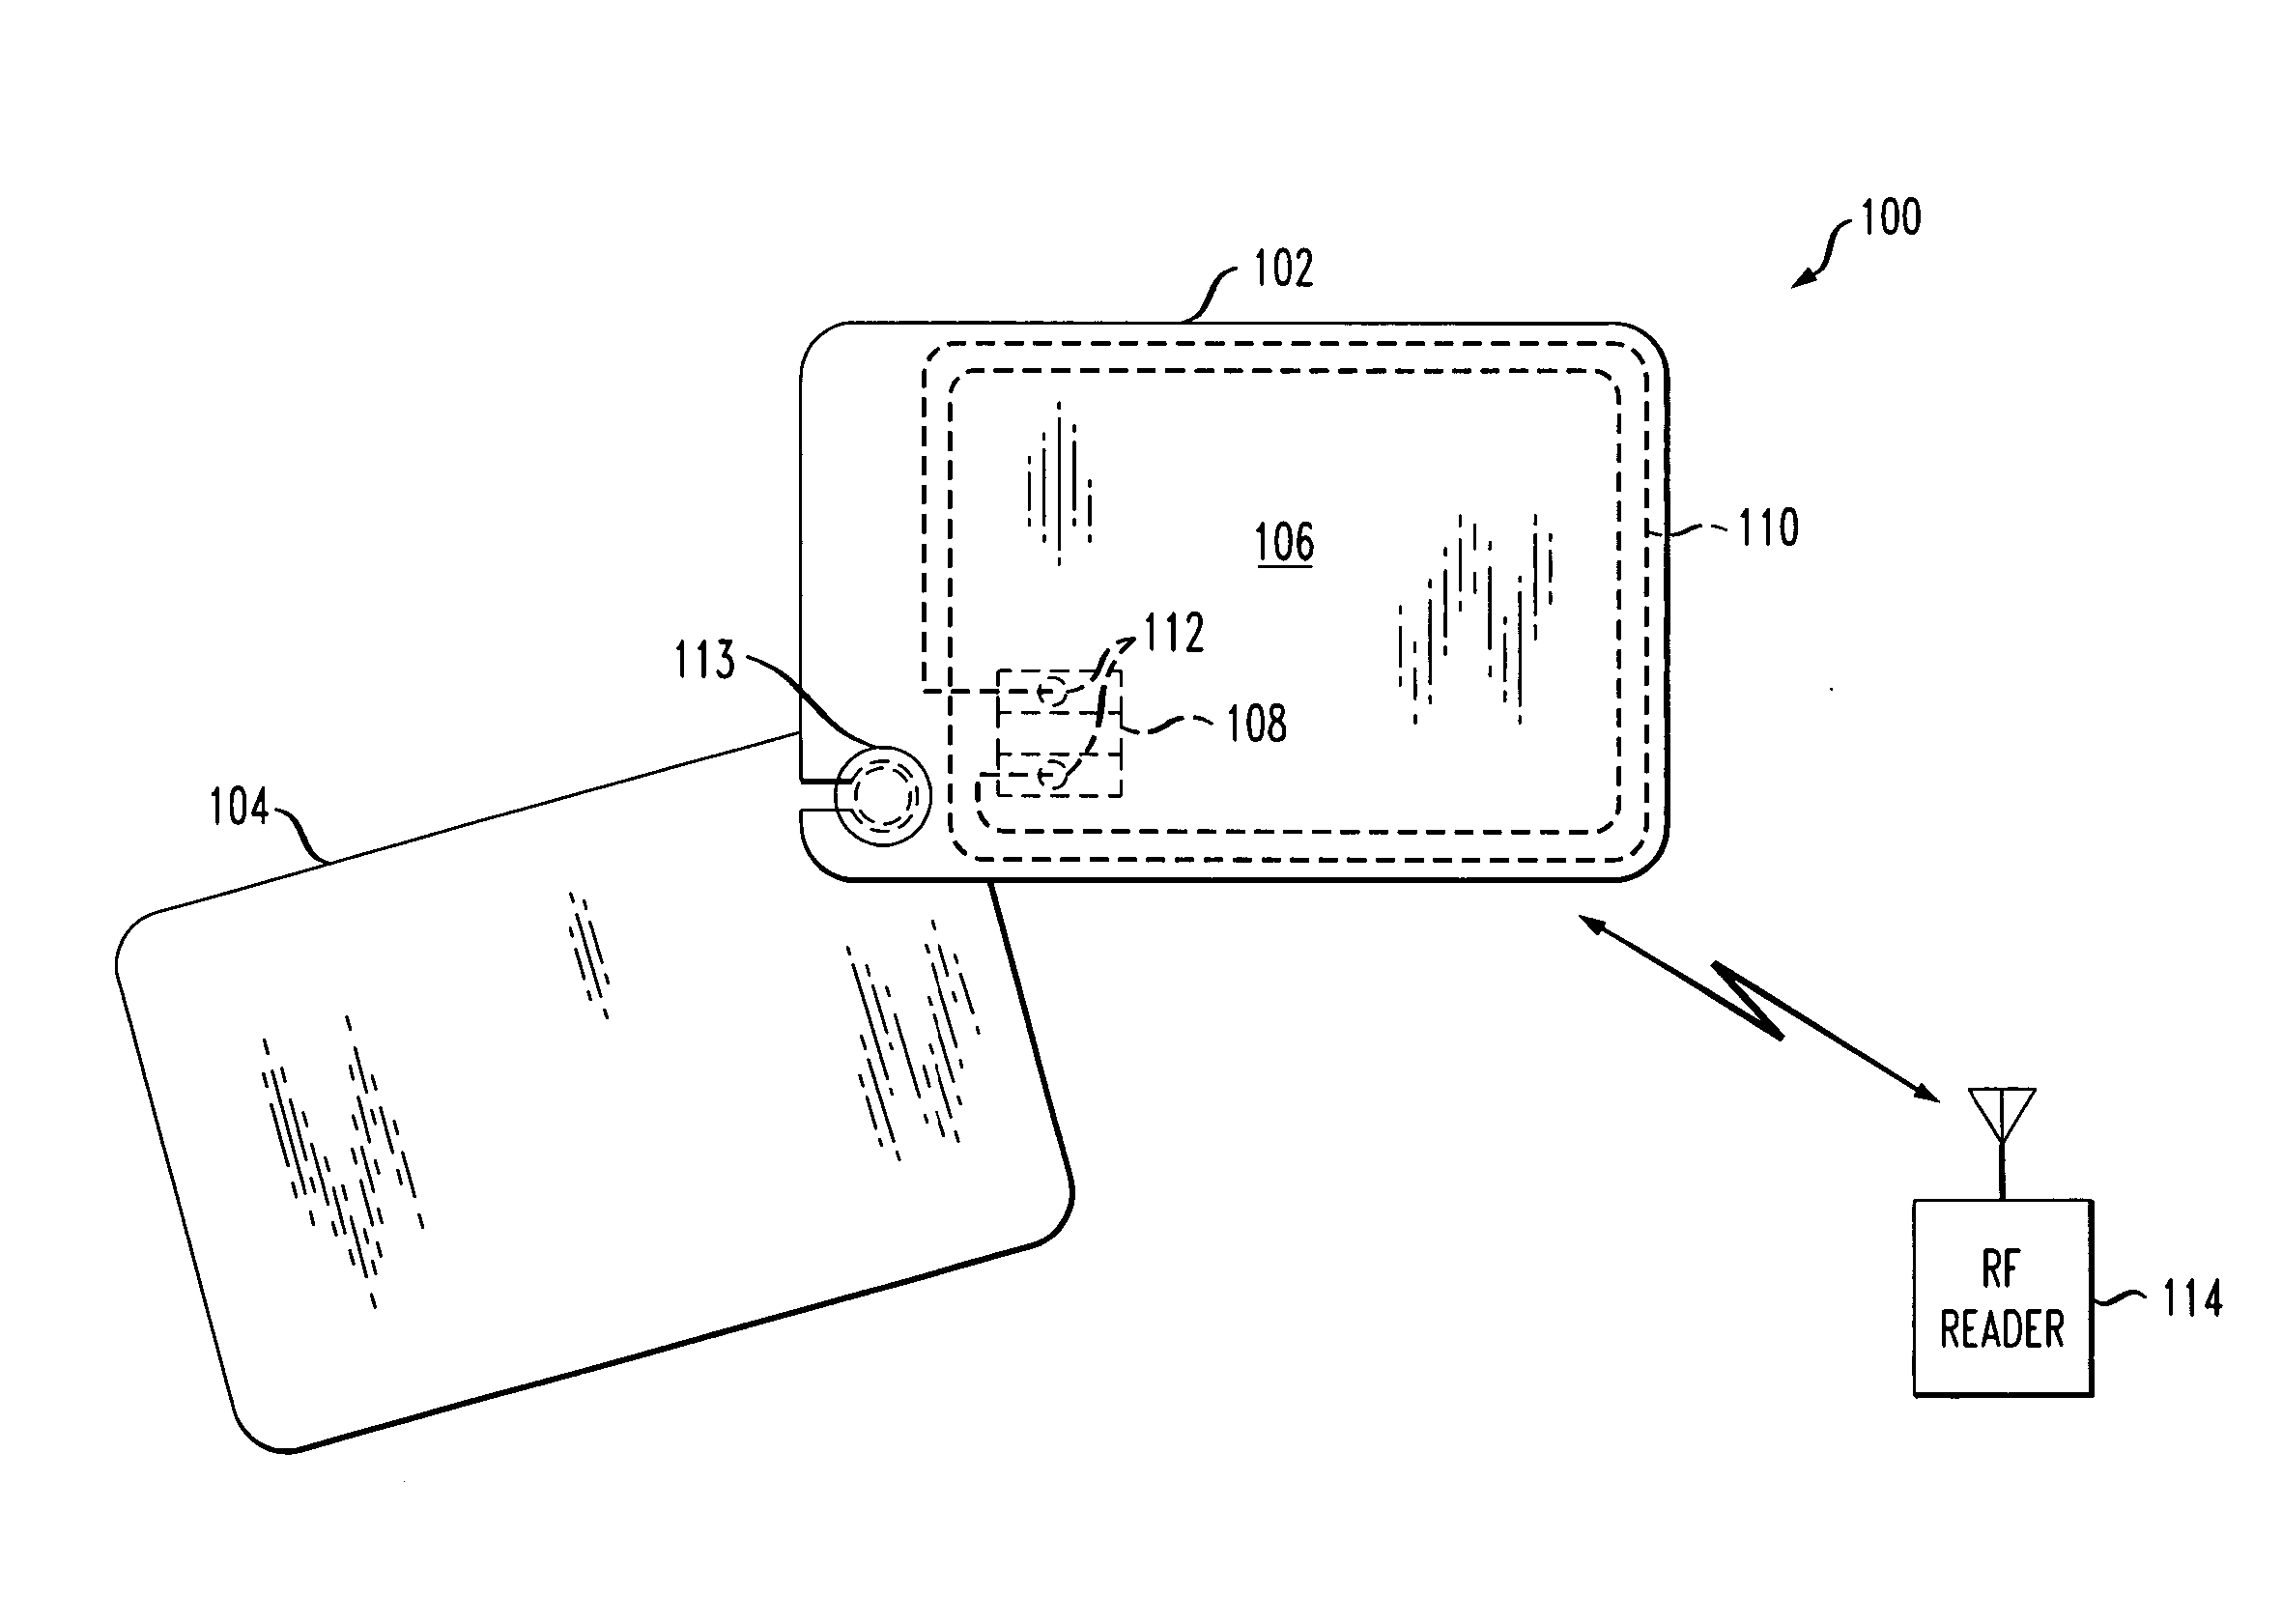 Contactless proximity communications apparatus and method